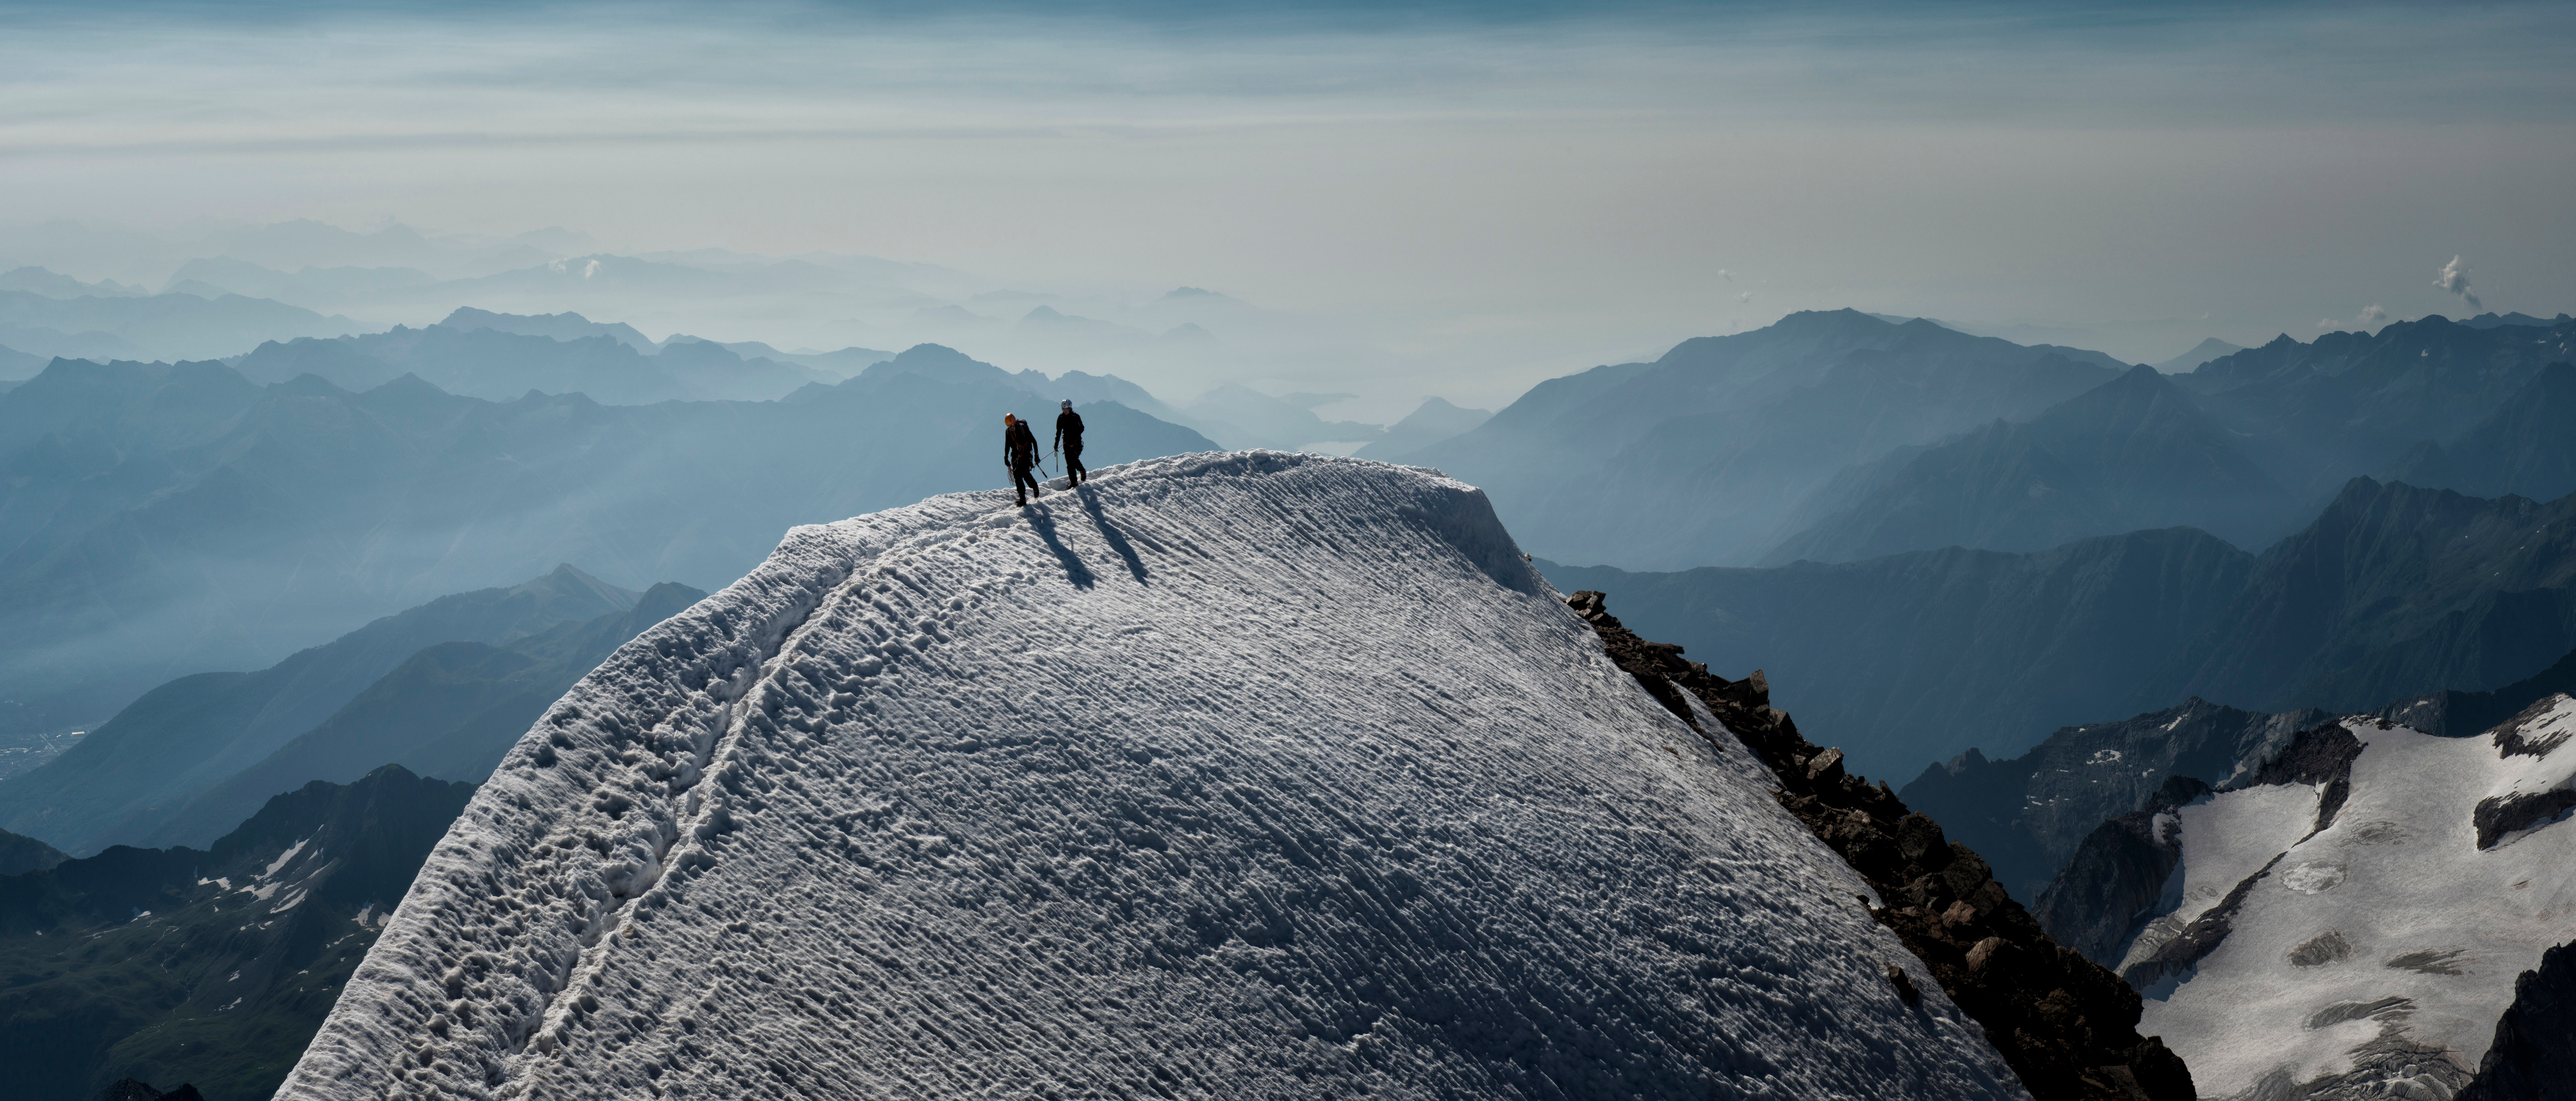 Two people at the crest of a snow mountain